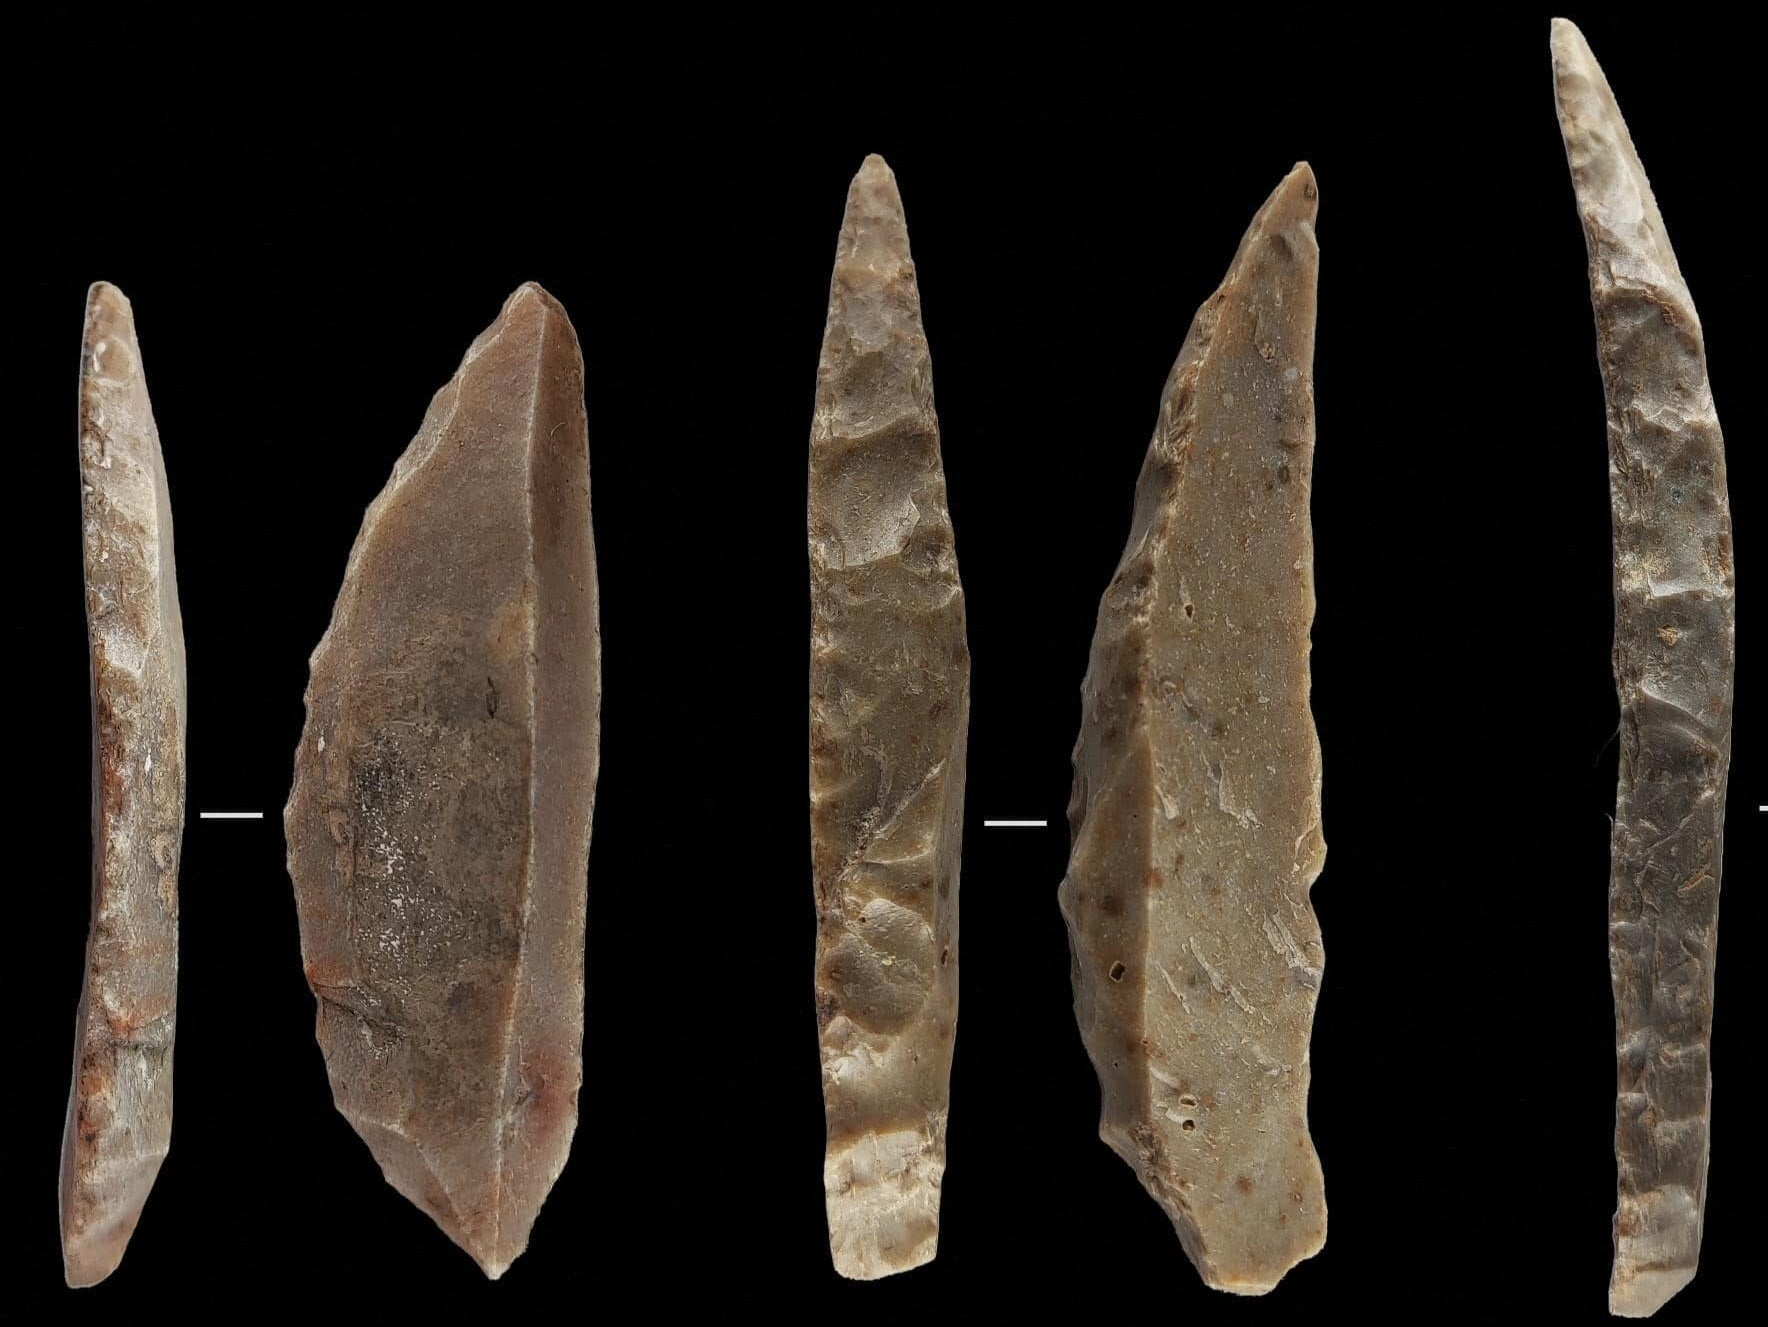 Stone knives believed to have been made by some of the last Neanderthals in France and northern Spain